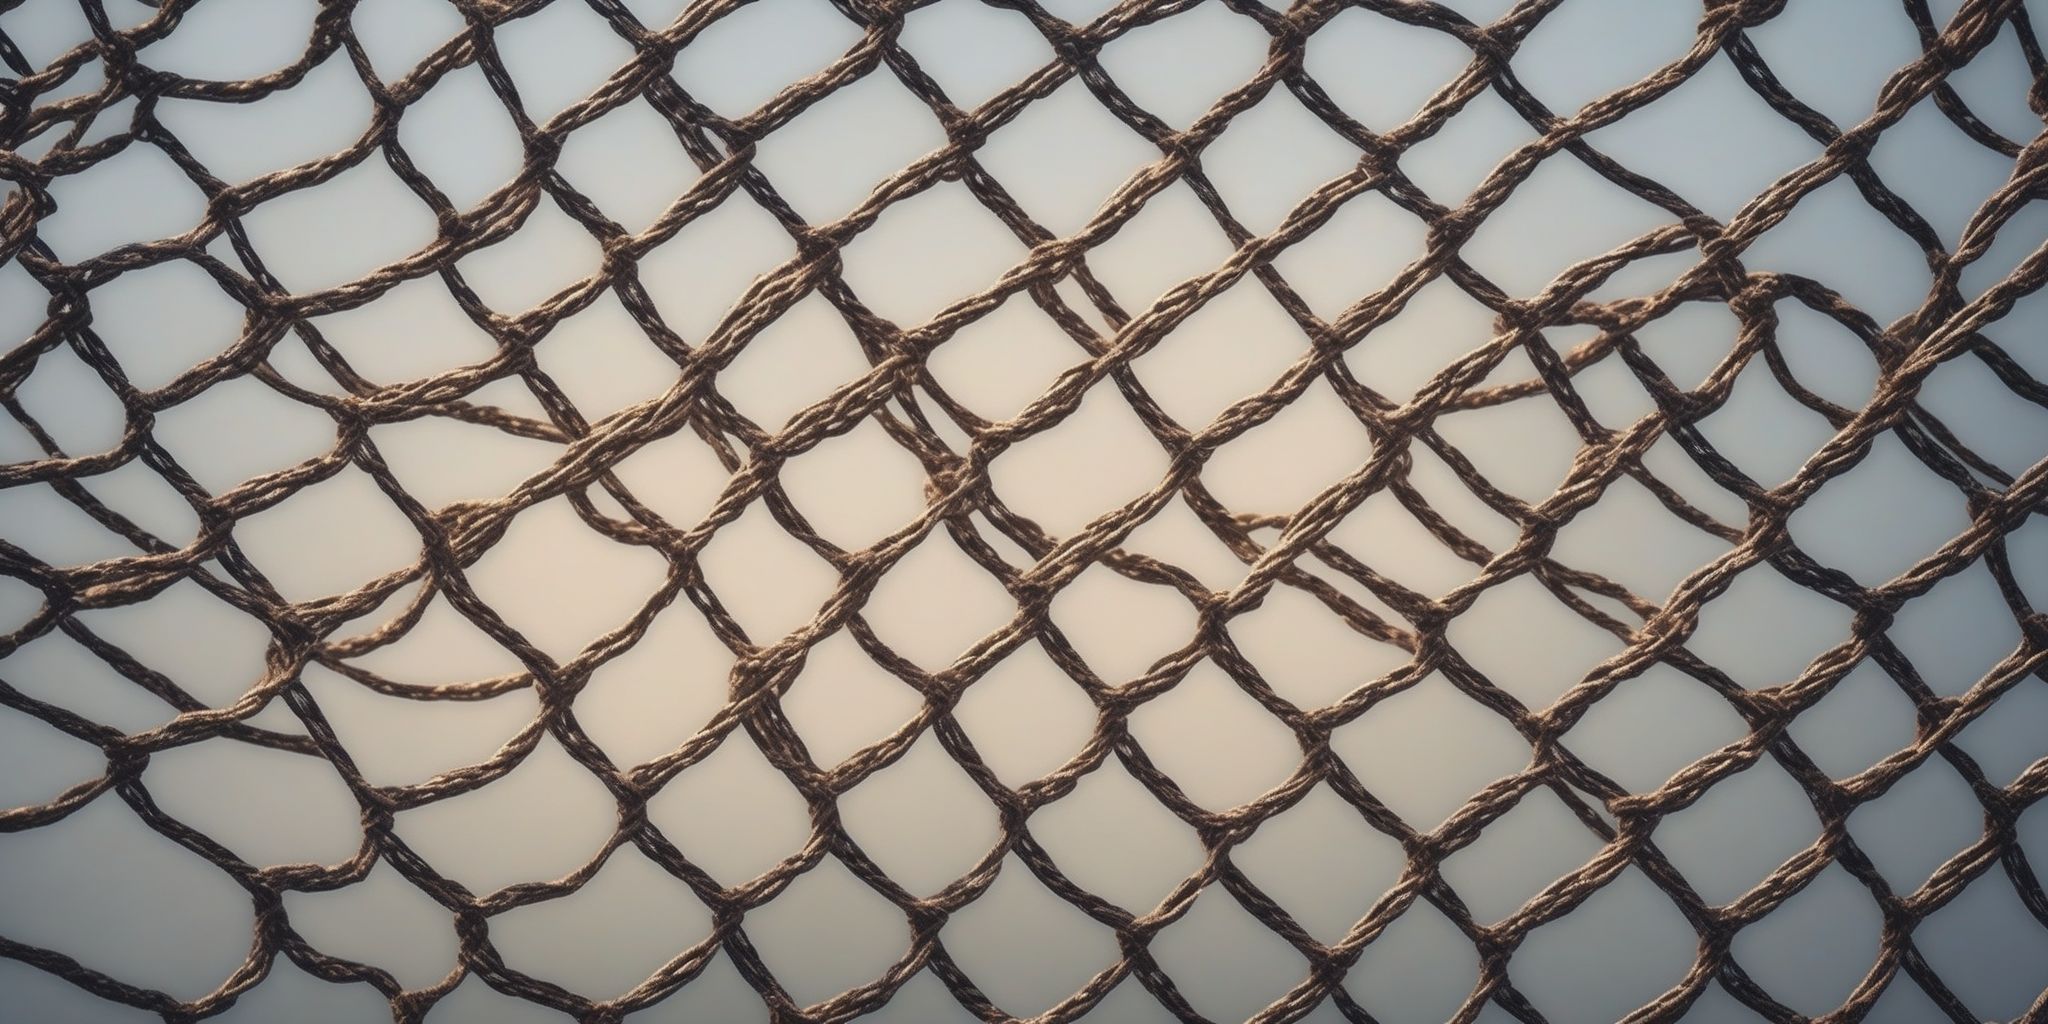 Safety net  in realistic, photographic style